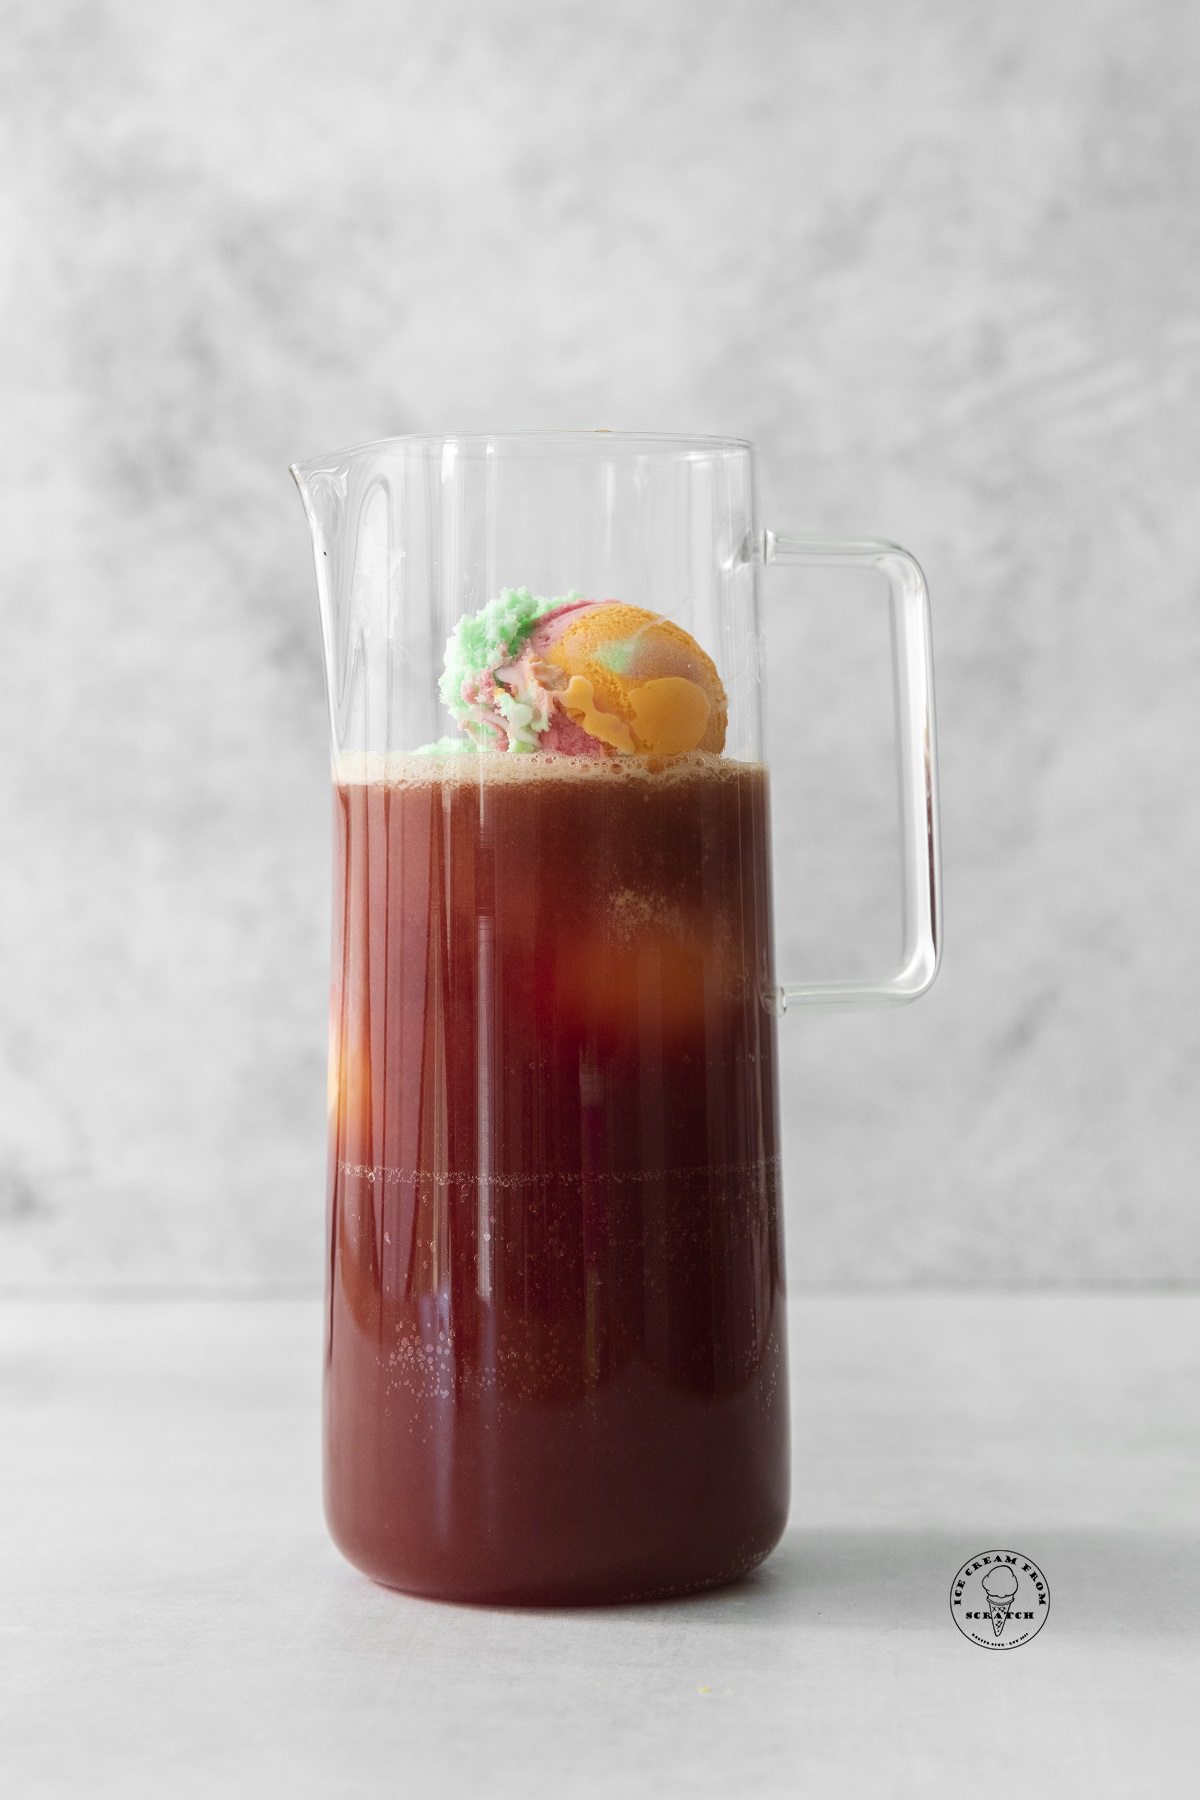 a slim clear glass pitcher filled with dark red punch and scoops of rainbow sherbet.